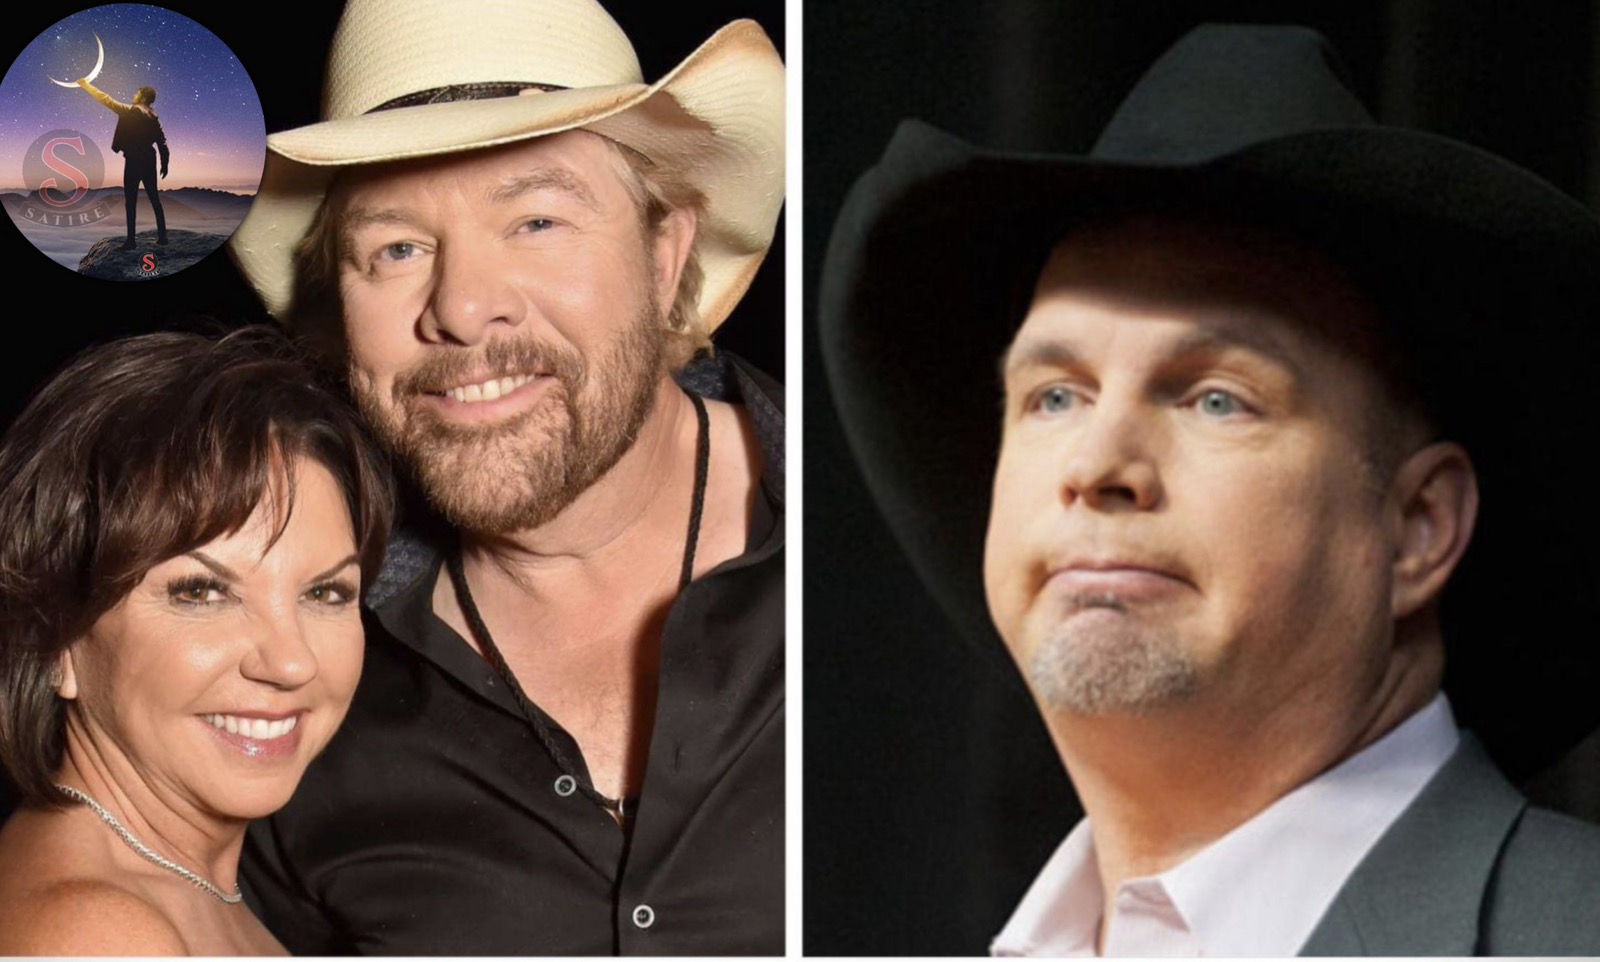 “Definitely Not” – Toby Keith’s Wife Rejects Garth Brooks’ Appeal to Perform at Toby’s Tribute Event